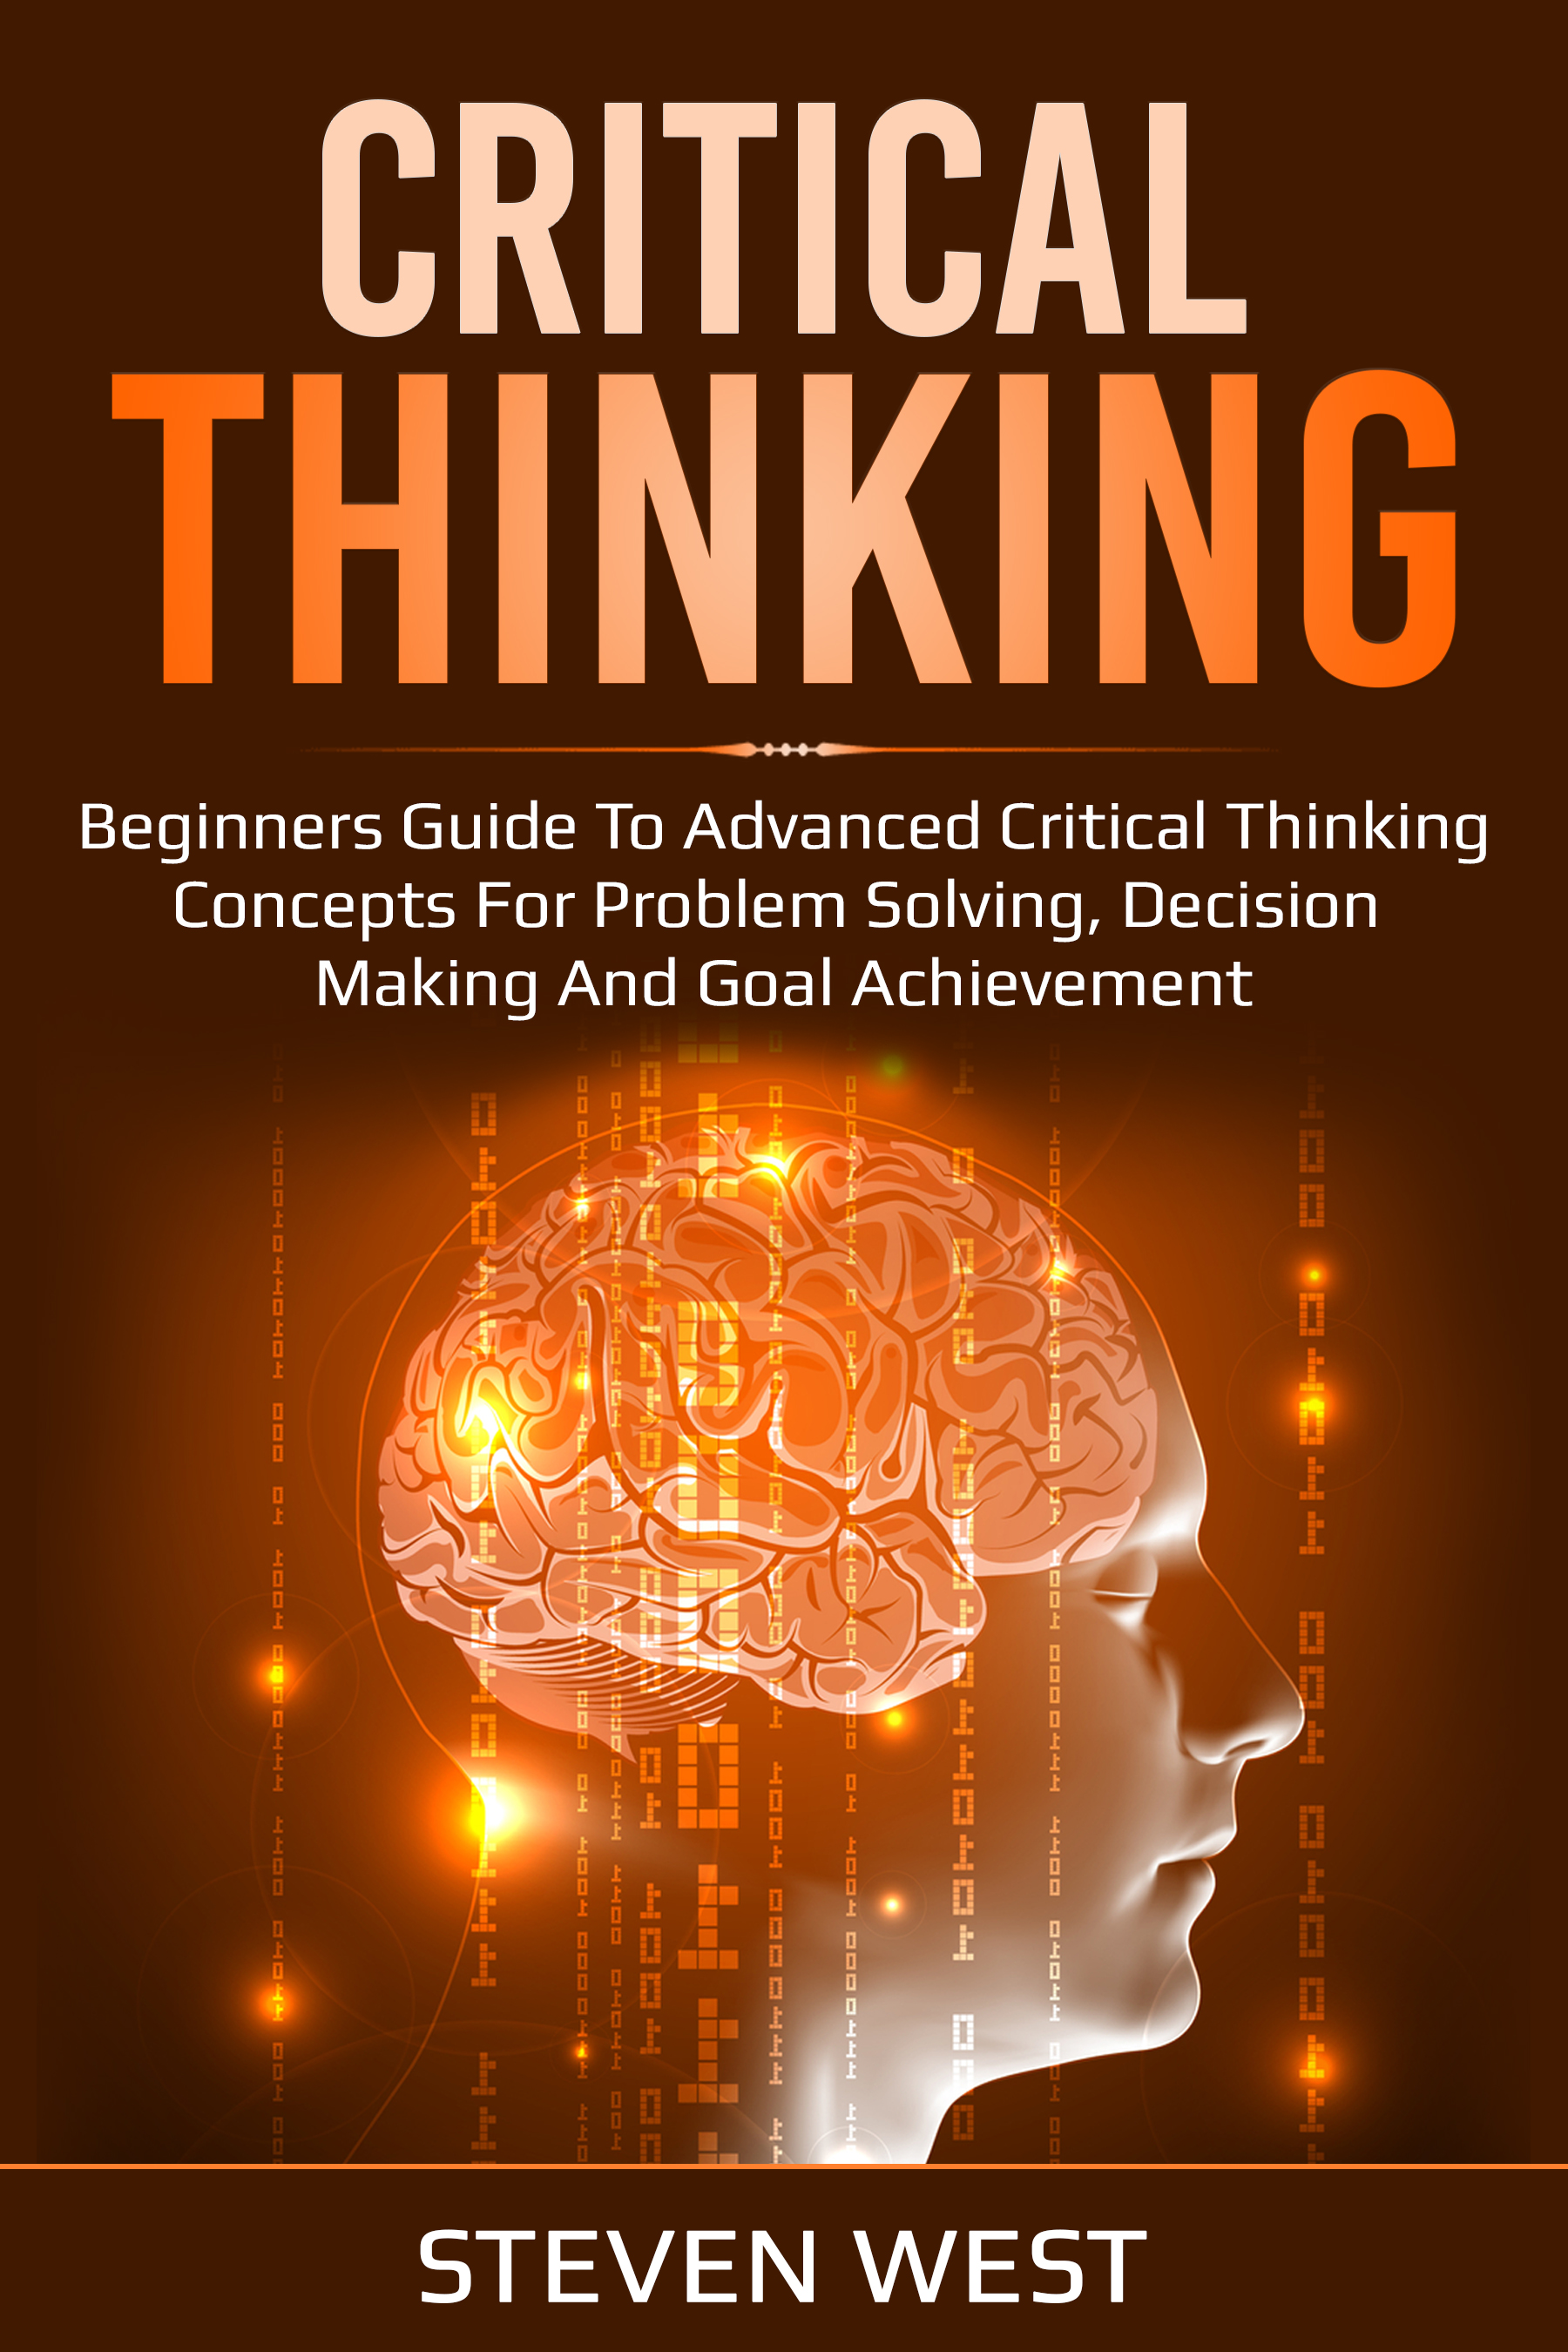 discuss the nature of critical thinking